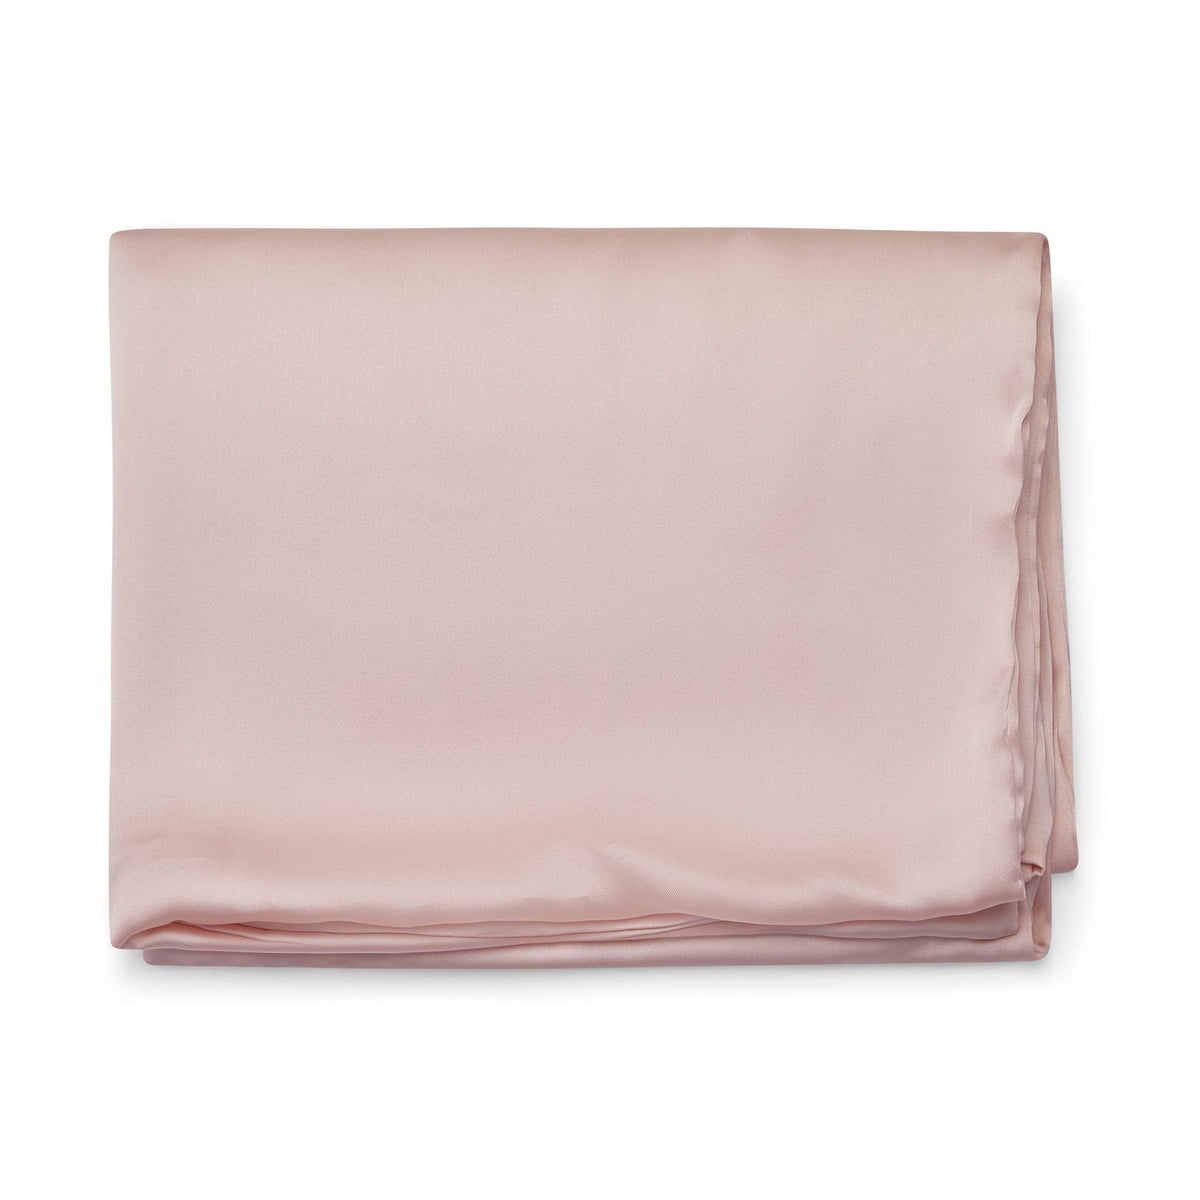 Only Curls Satin Pillowcase - Pink - Only Curls